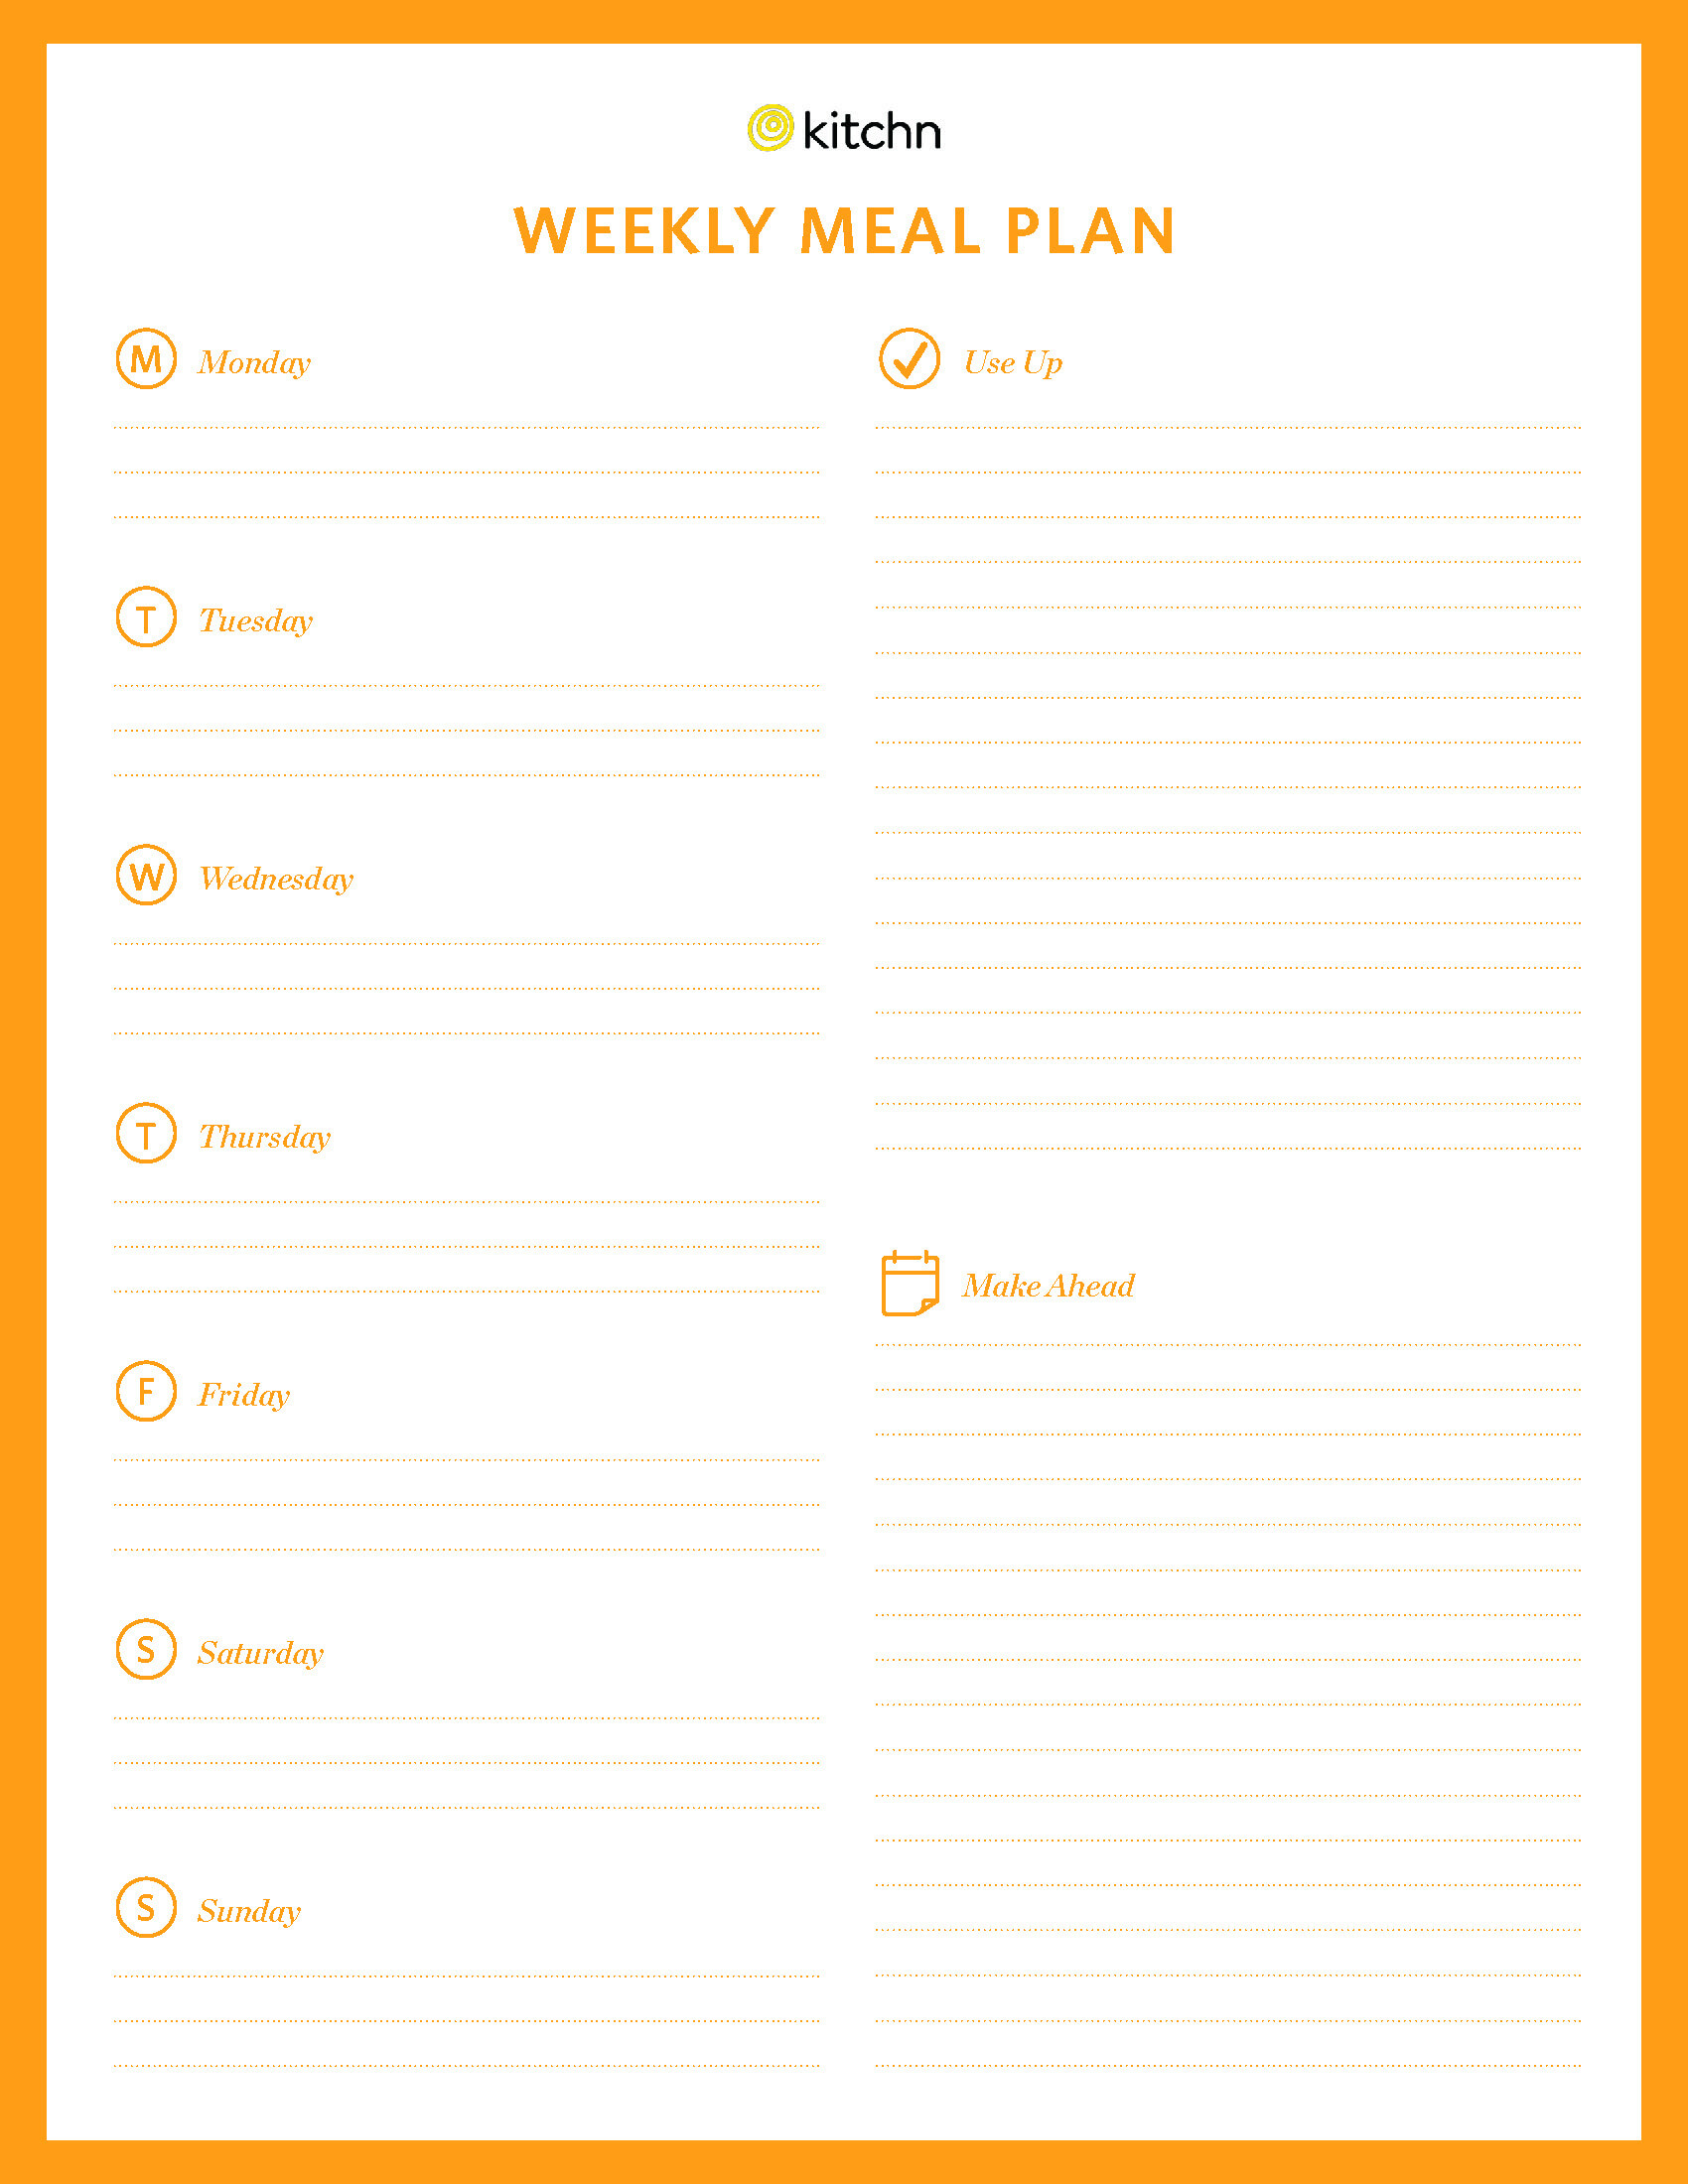 Kitchn's Meal Plan Template | Kitchn Inside Blank Meal Plan Template